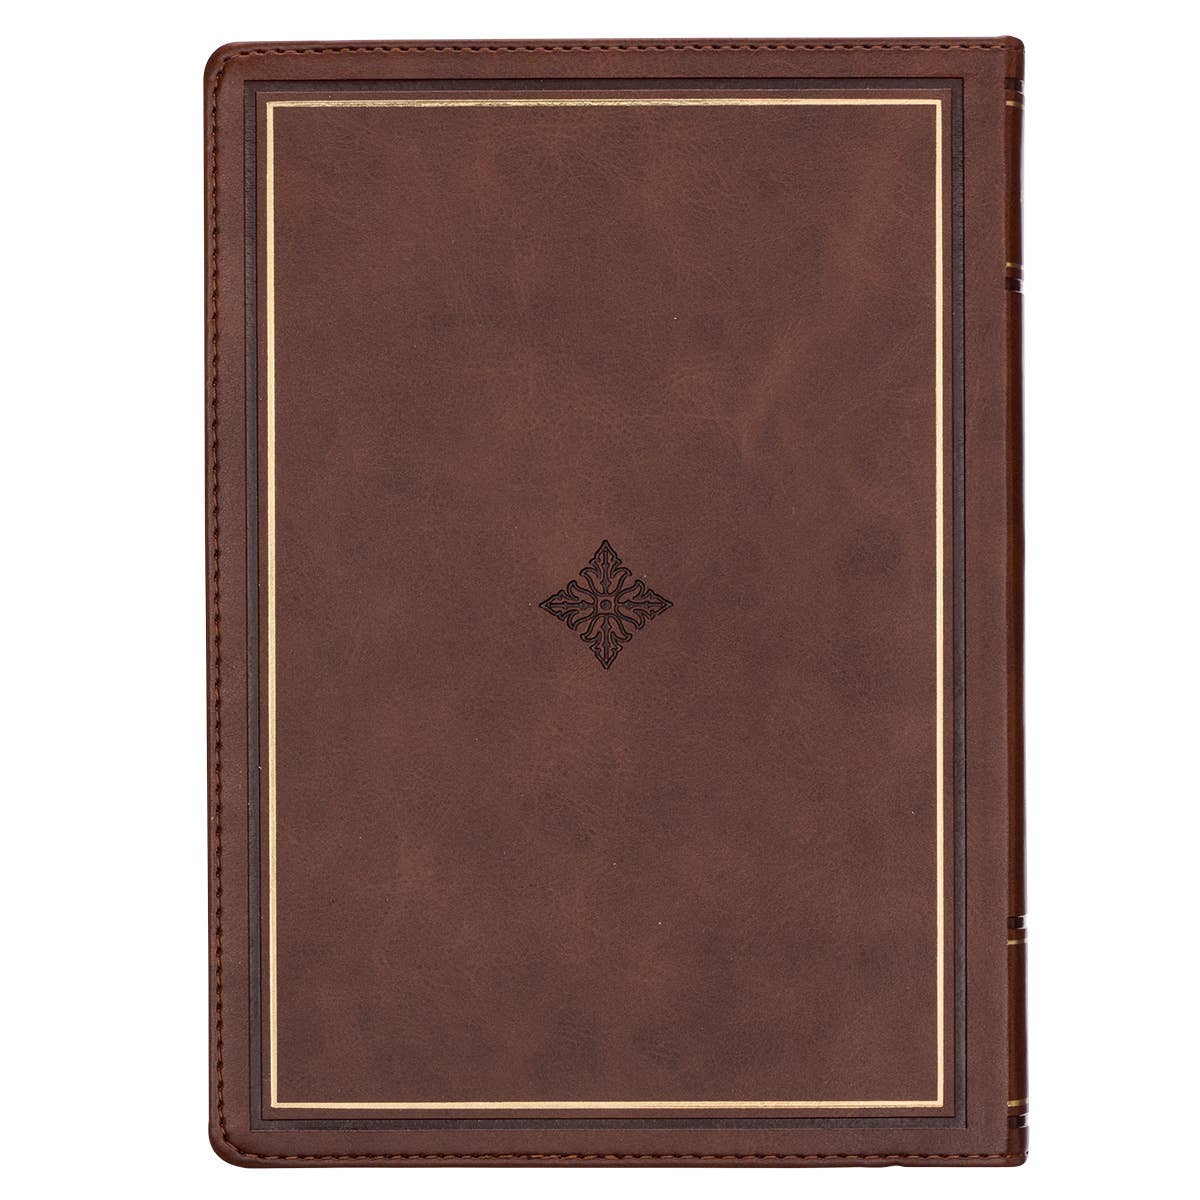 Walking With God Faux Leather Devotional